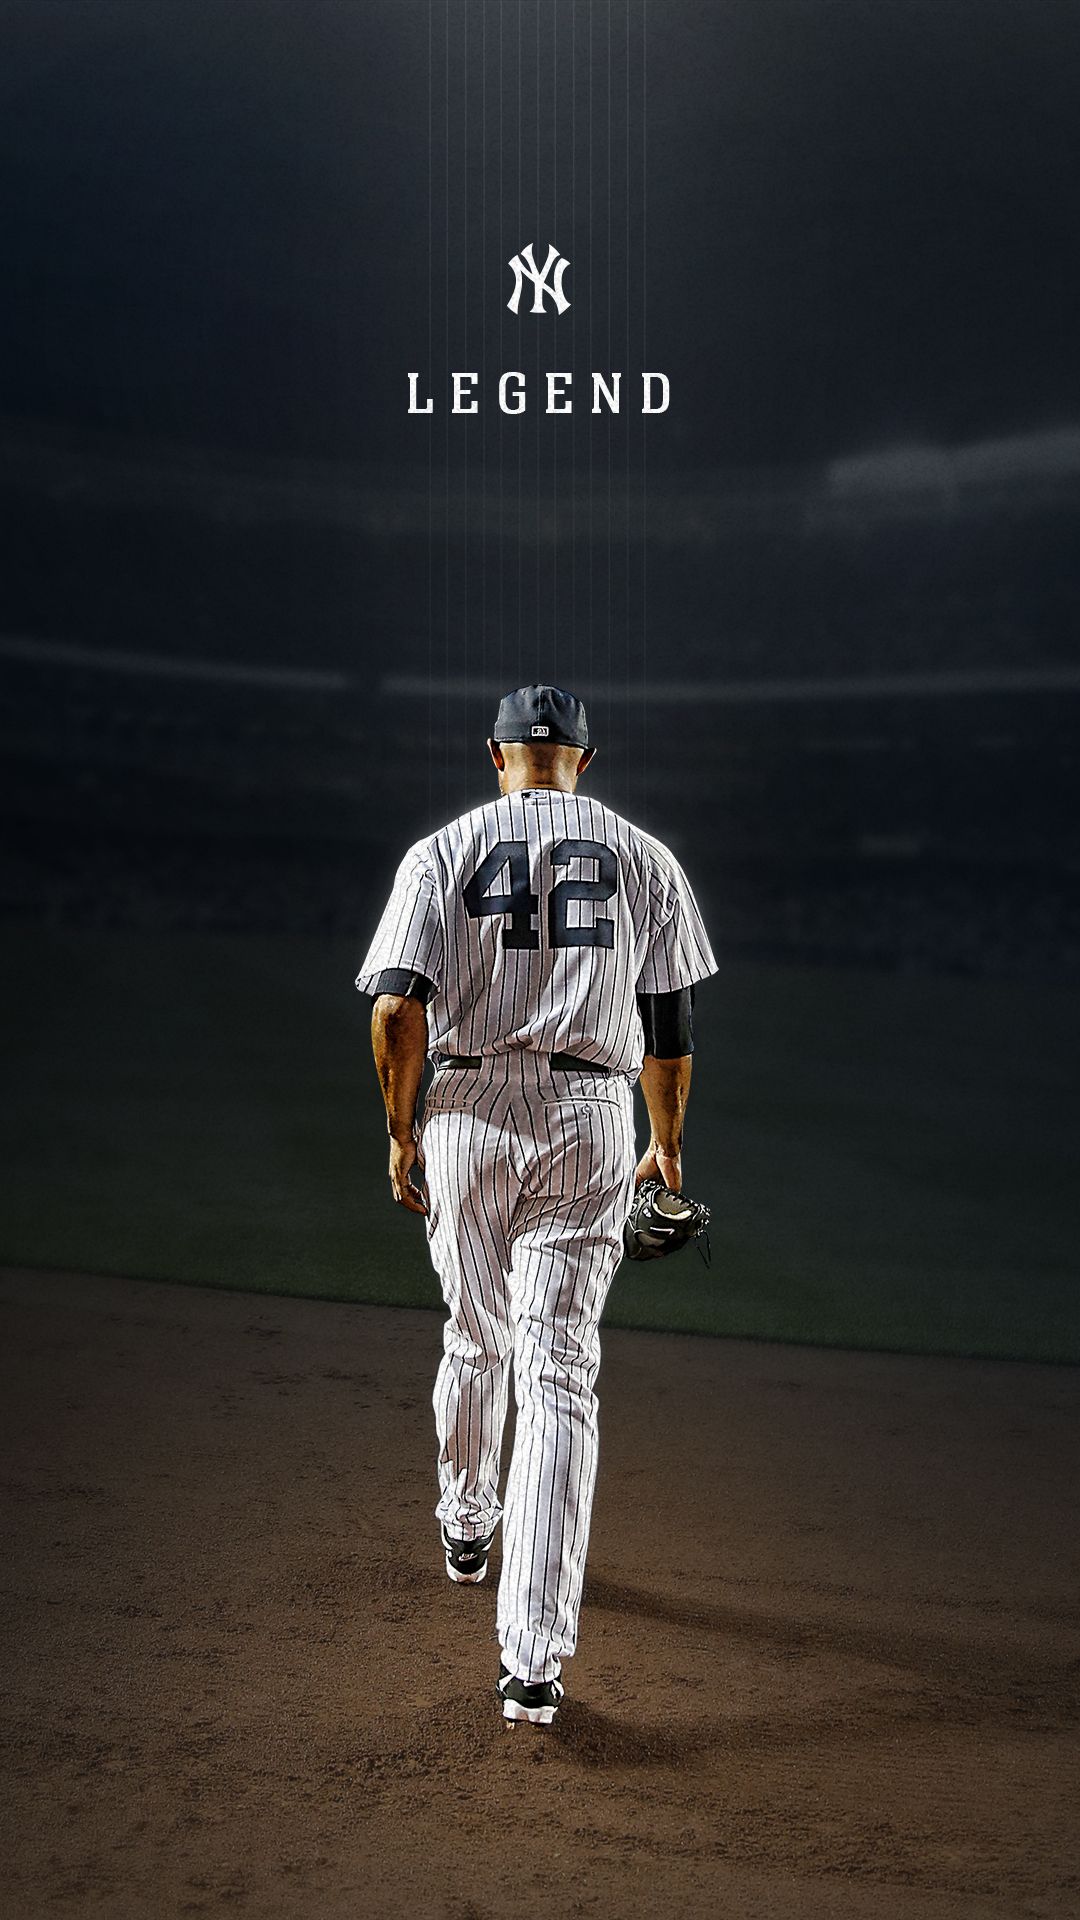 Mlb Player Wallpapers 76 images